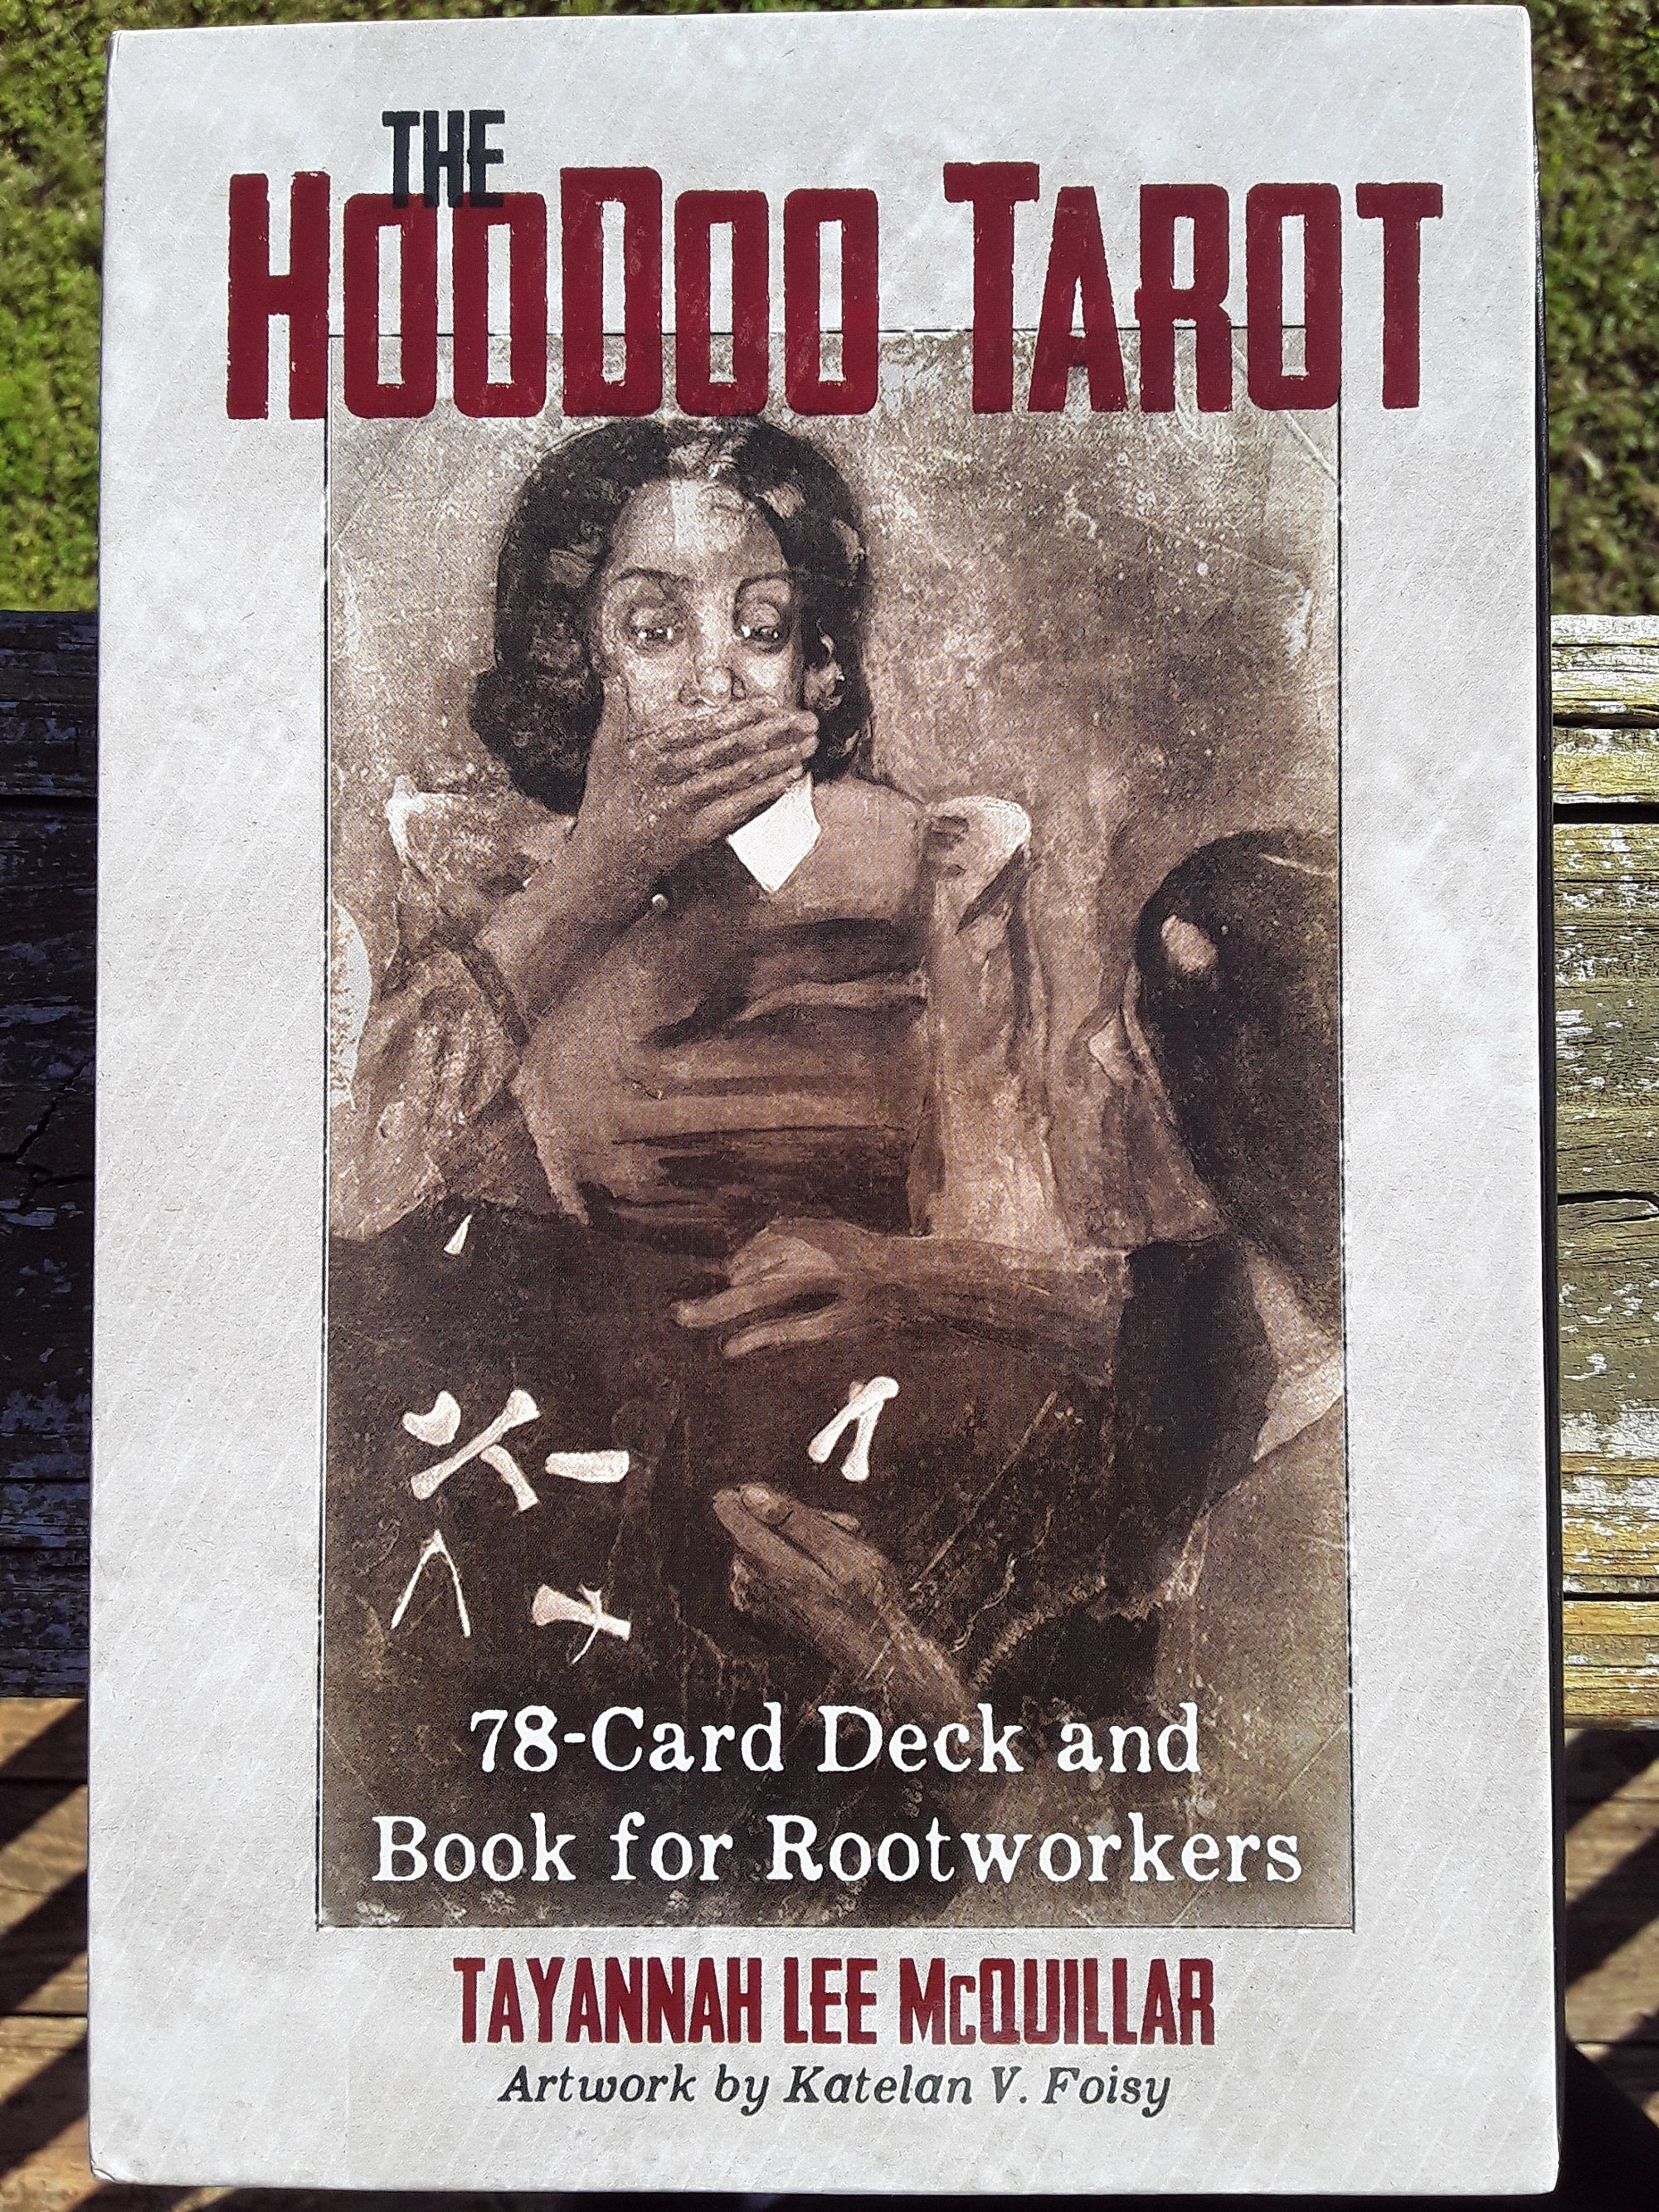 The Hoodoo Tarot, 78-card tarot deck includes 147 page 6x9 in. Guidebook